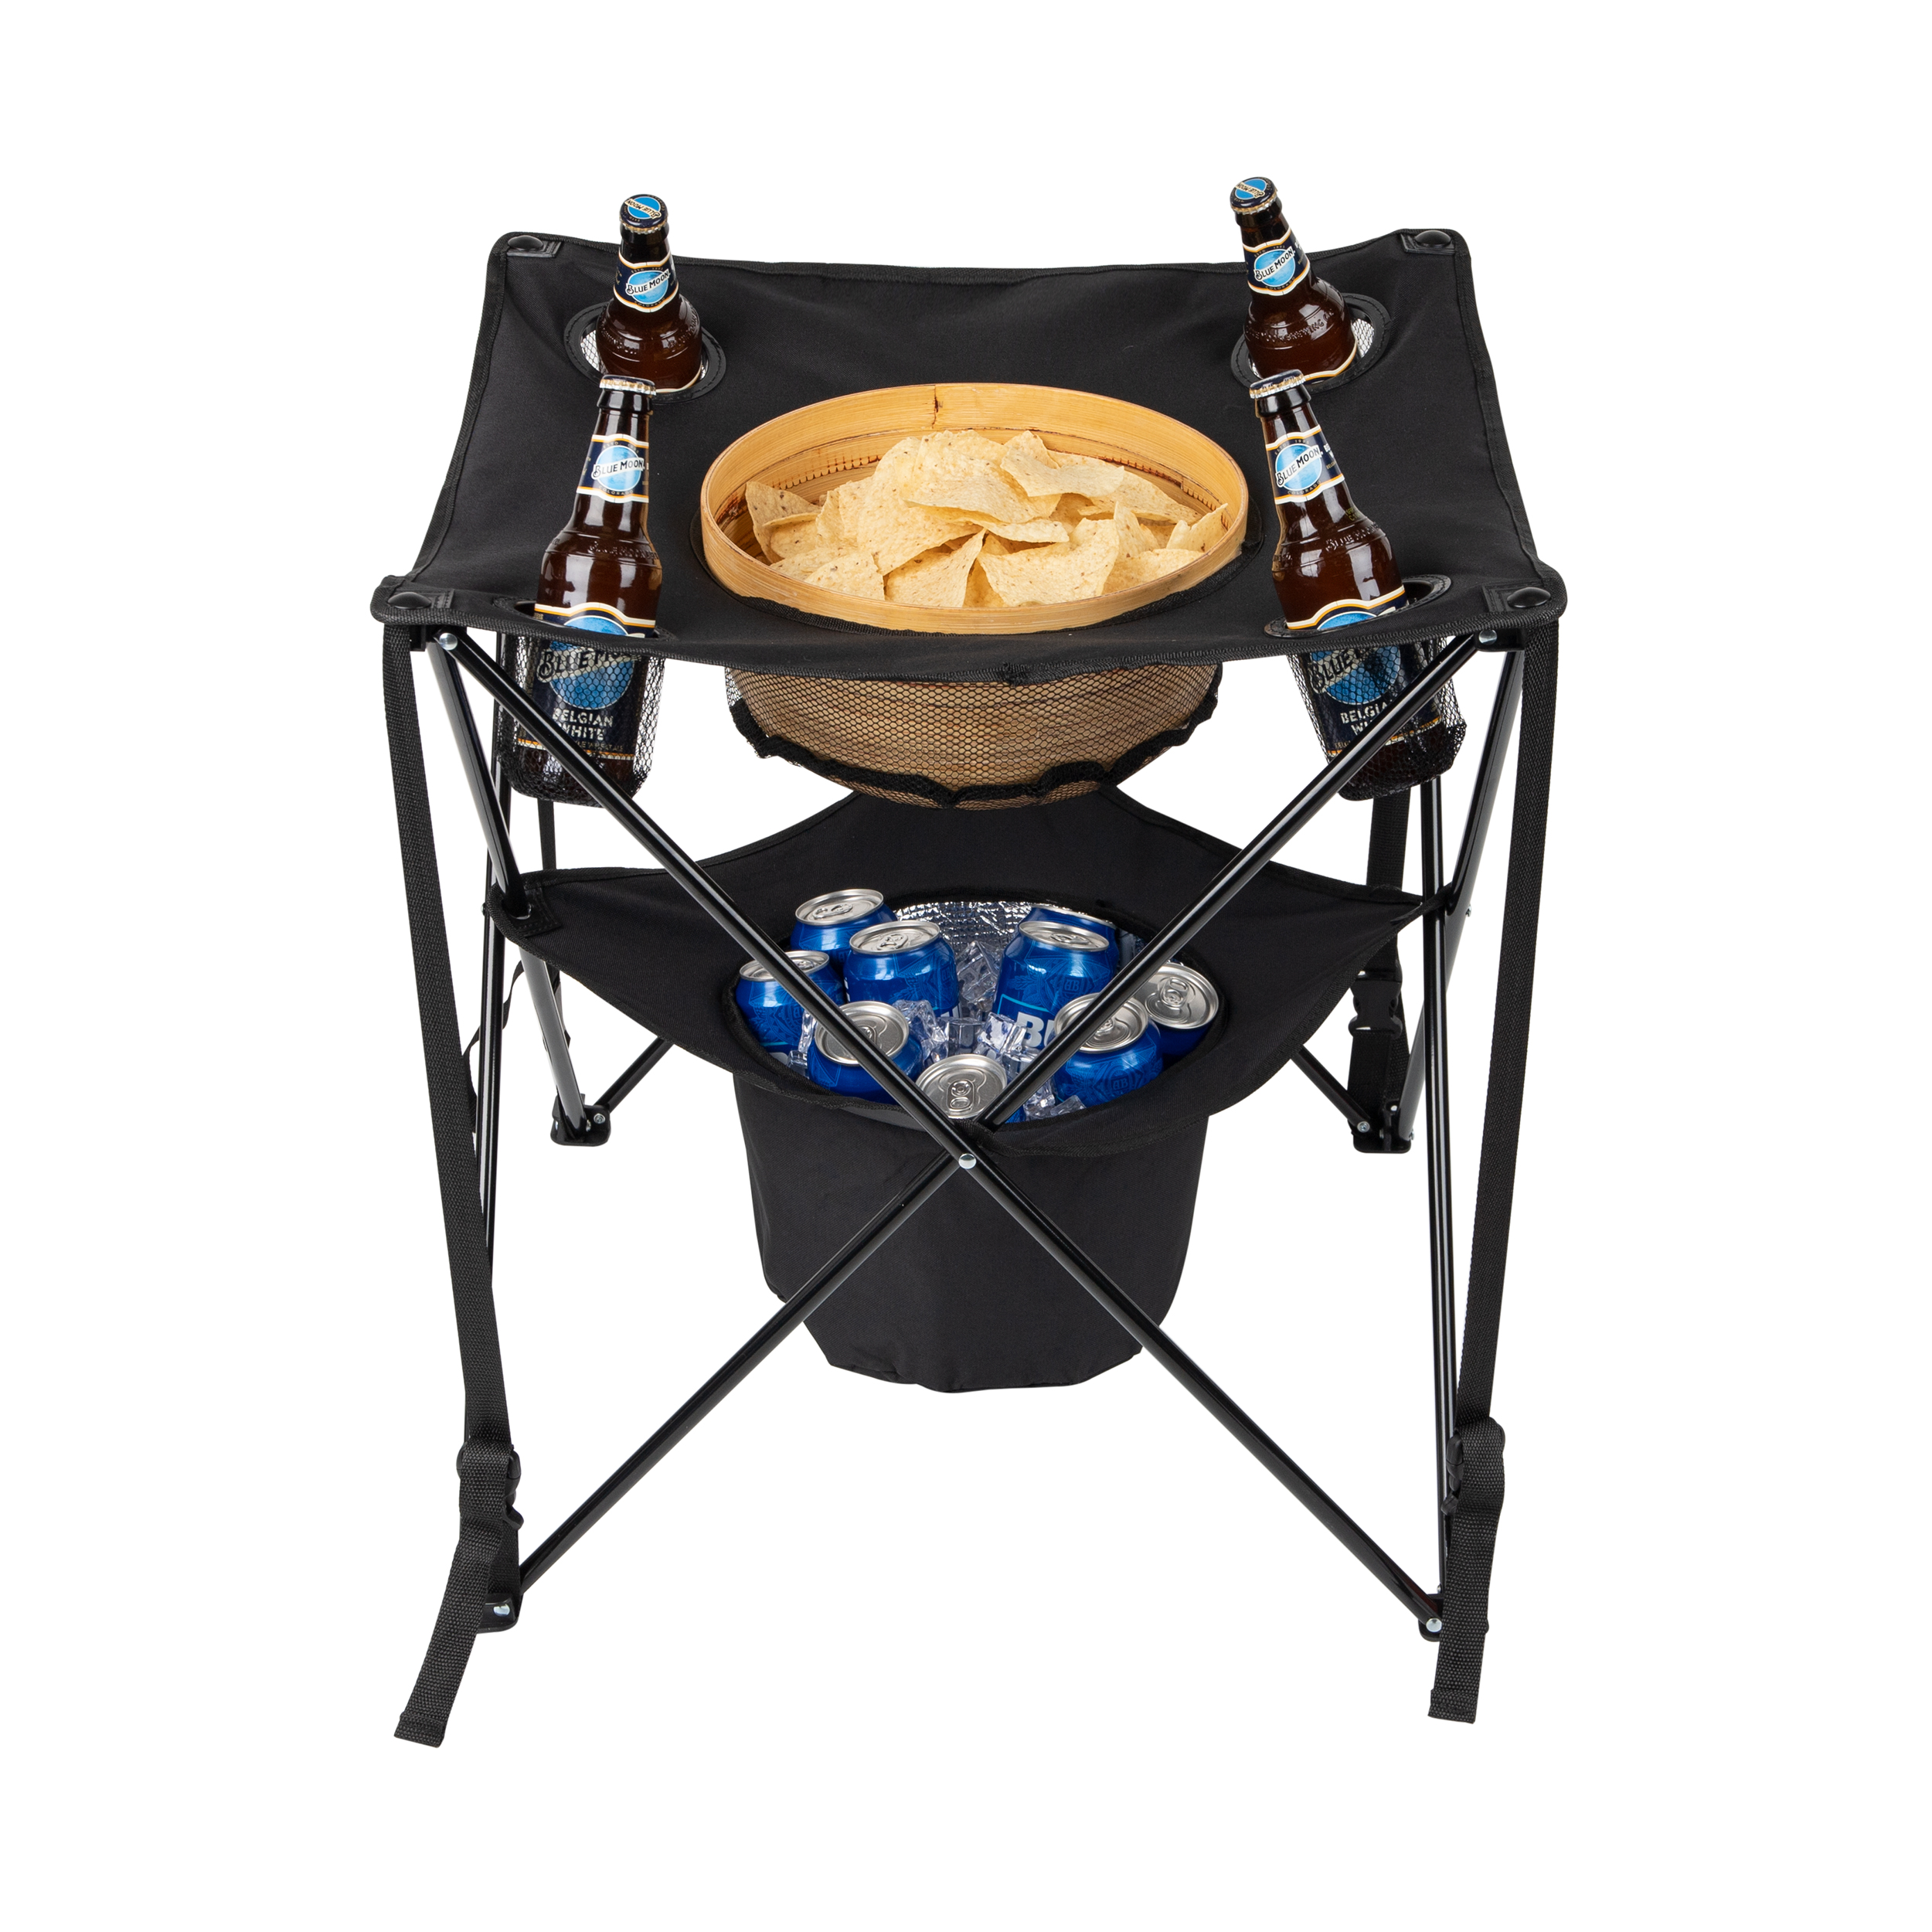 Mind Reader Tailgating Table Collapsible Folding Camping Table with Insulated Cooler, Food Basket, and Travel Bag for Barbeque, Picnic, Camping, and Tailgate - image 2 of 6